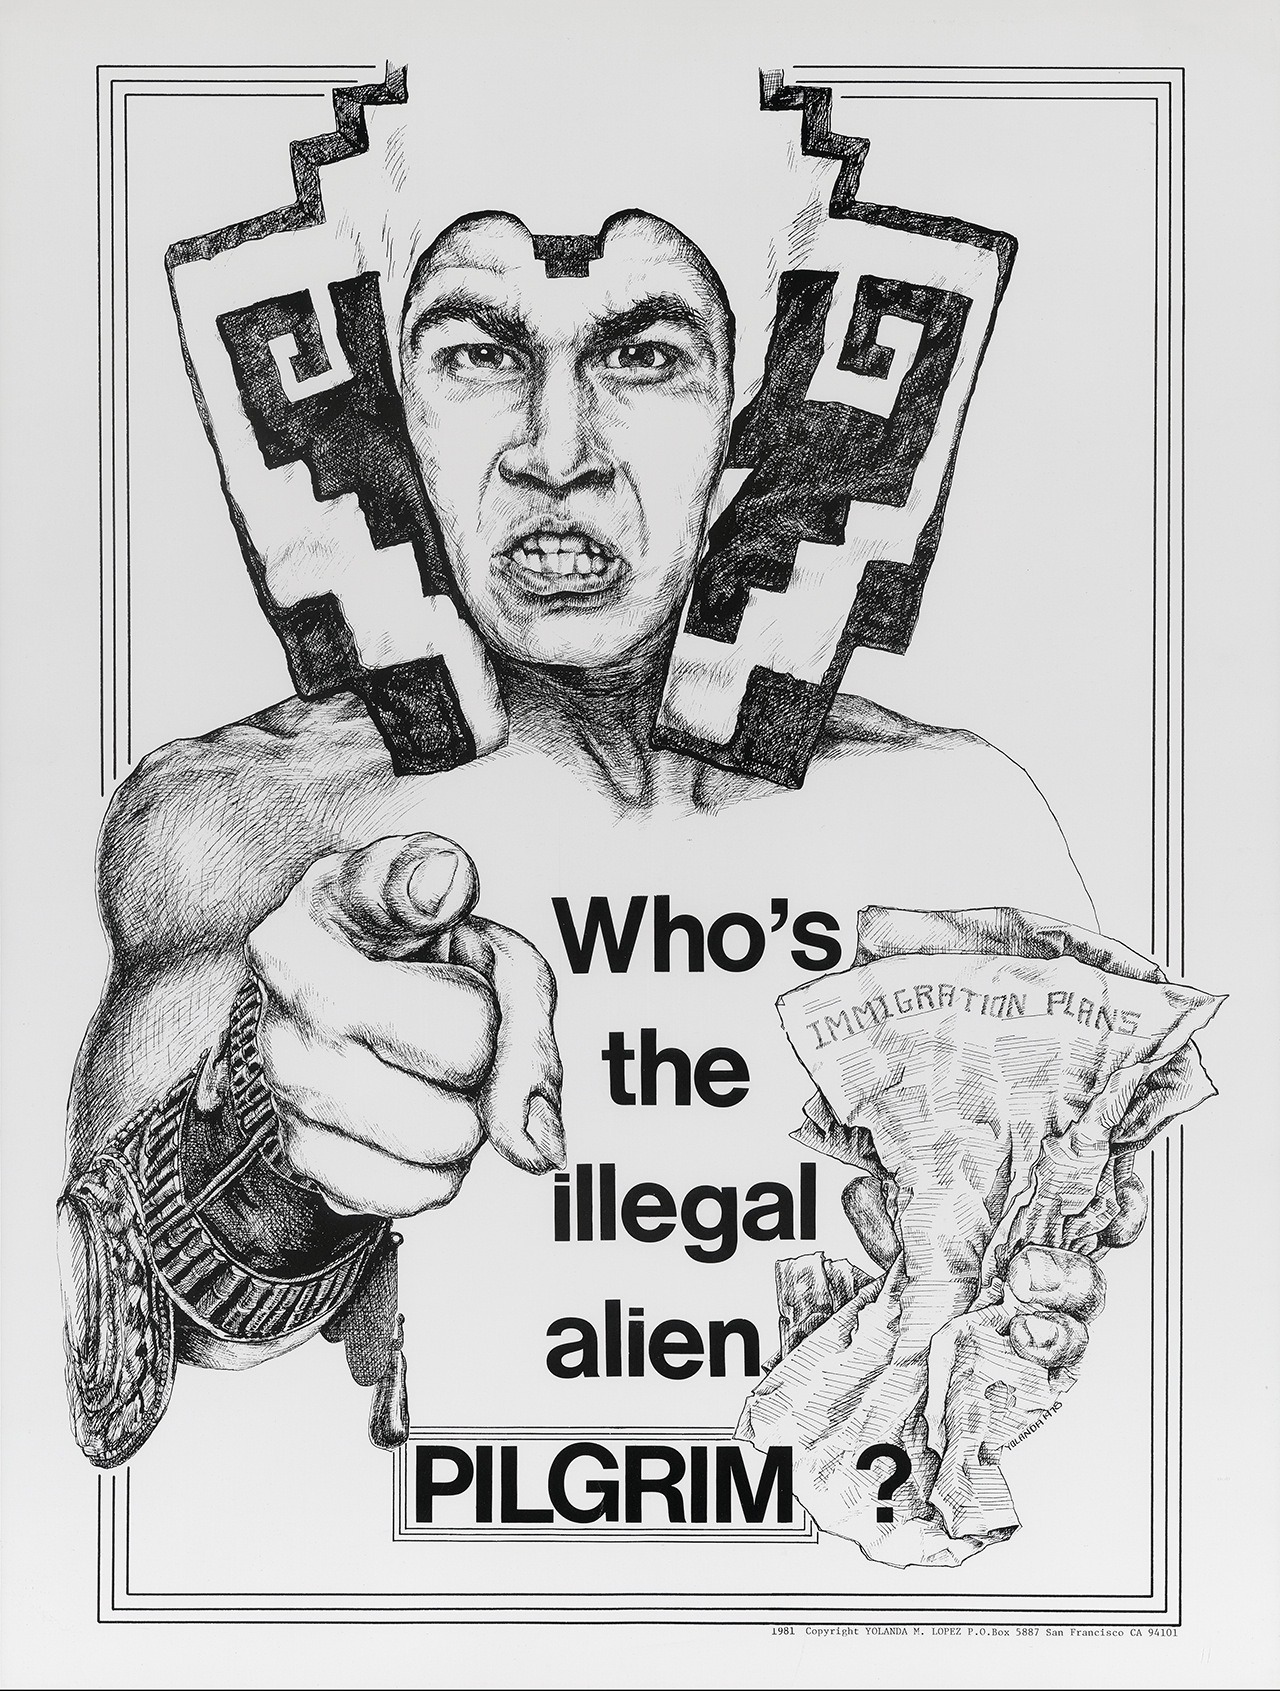 Yolanda M. Lopez (San Francisco) Who’s the Illegal Alien, Pilgrim? poster, 1978 [[MORE]]“This 1978 poster was created during a period of political debate in the U.S. which resulted in the passage of the Immigration and Nationality Act Amendments of...